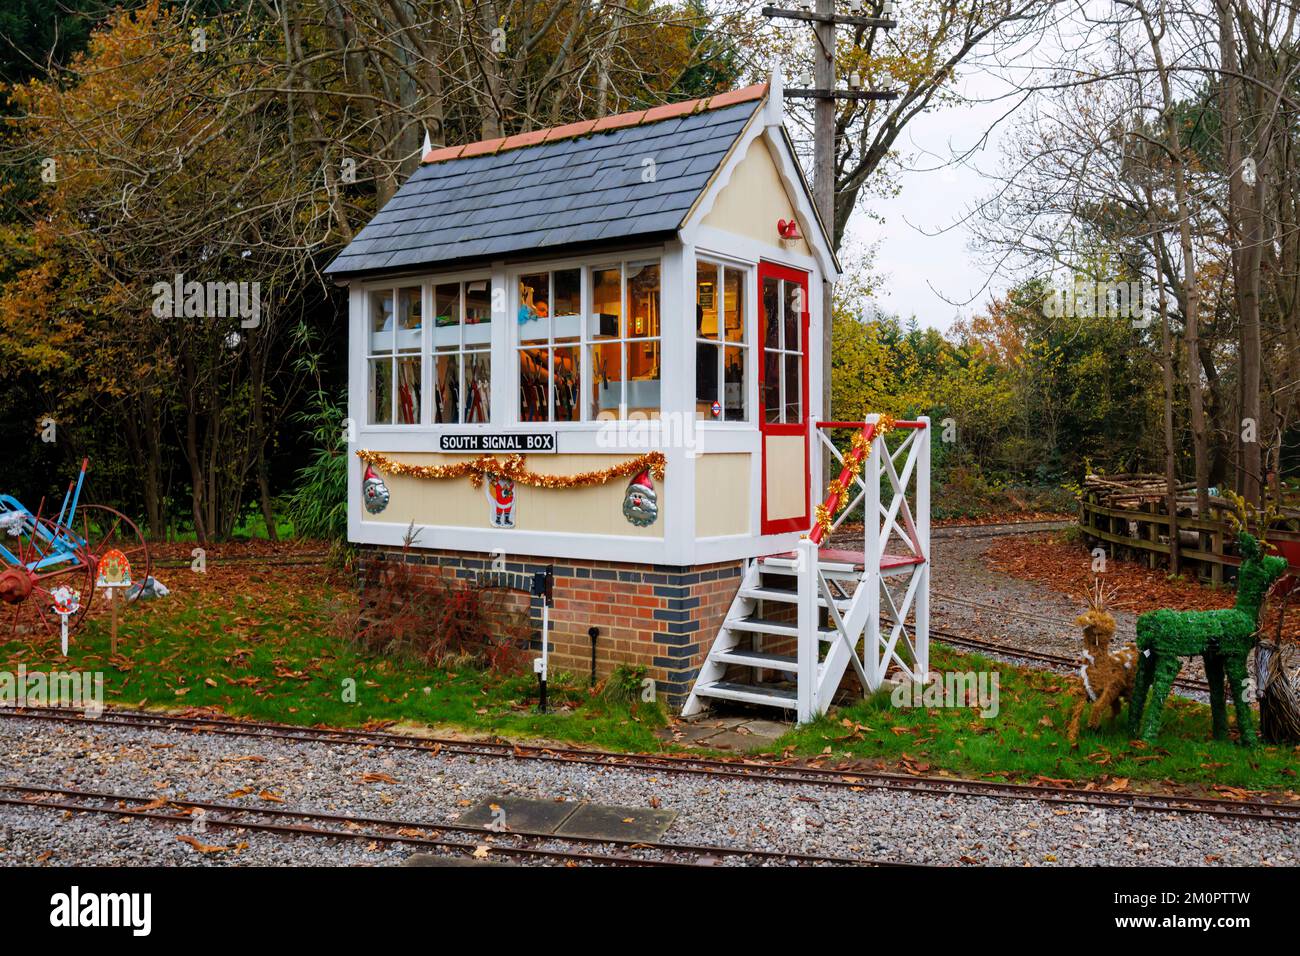 The signal box at the popular annual Santa Special event at Mizen's Railway in Knaphill, Woking, an annual event of miniature train rides for children Stock Photo